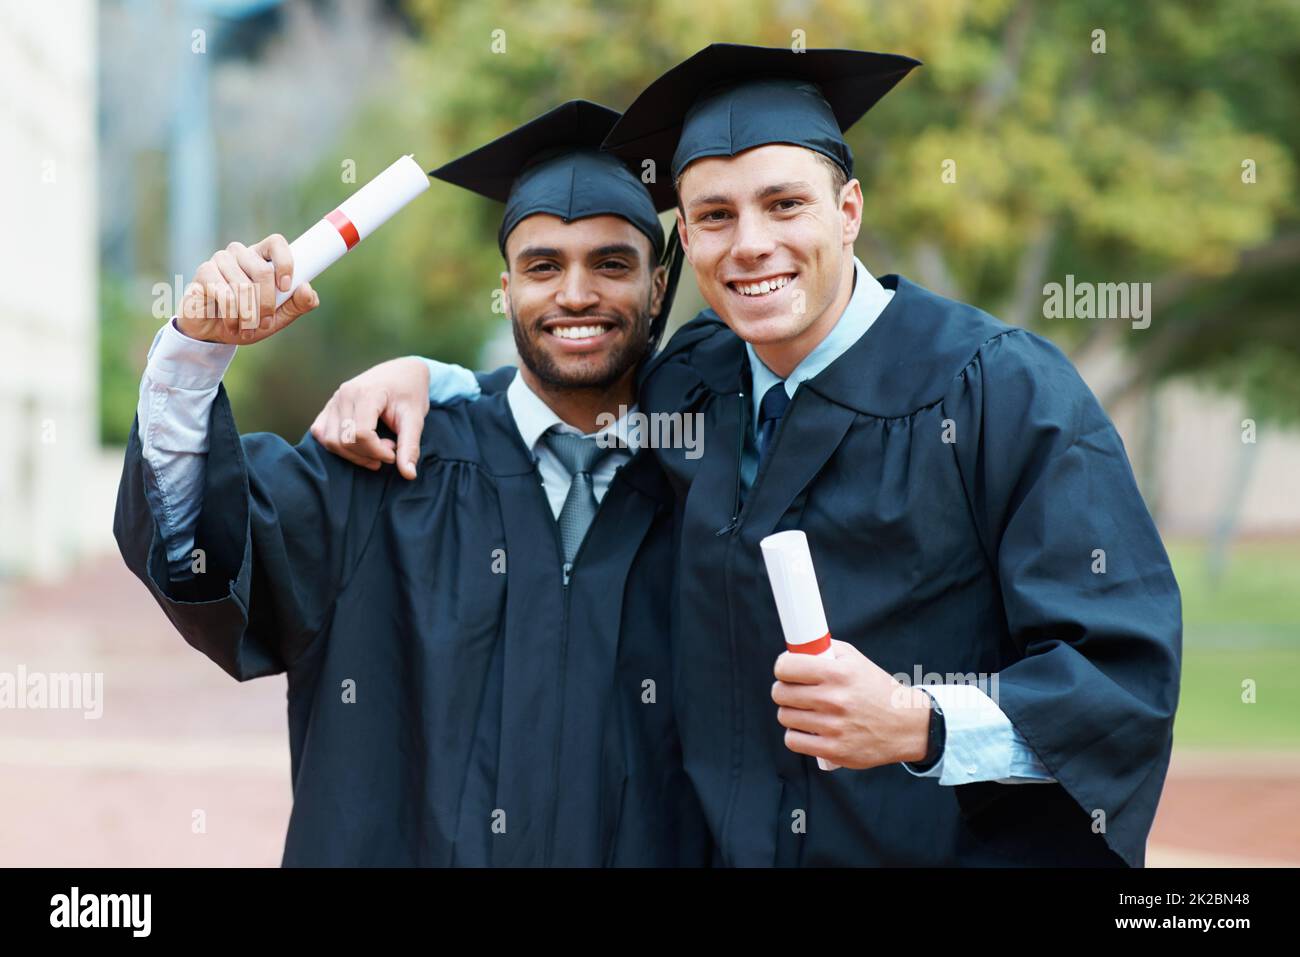 Were on our way to success. Two young college graduates holding their diplomas while wearing cap and gown. Stock Photo